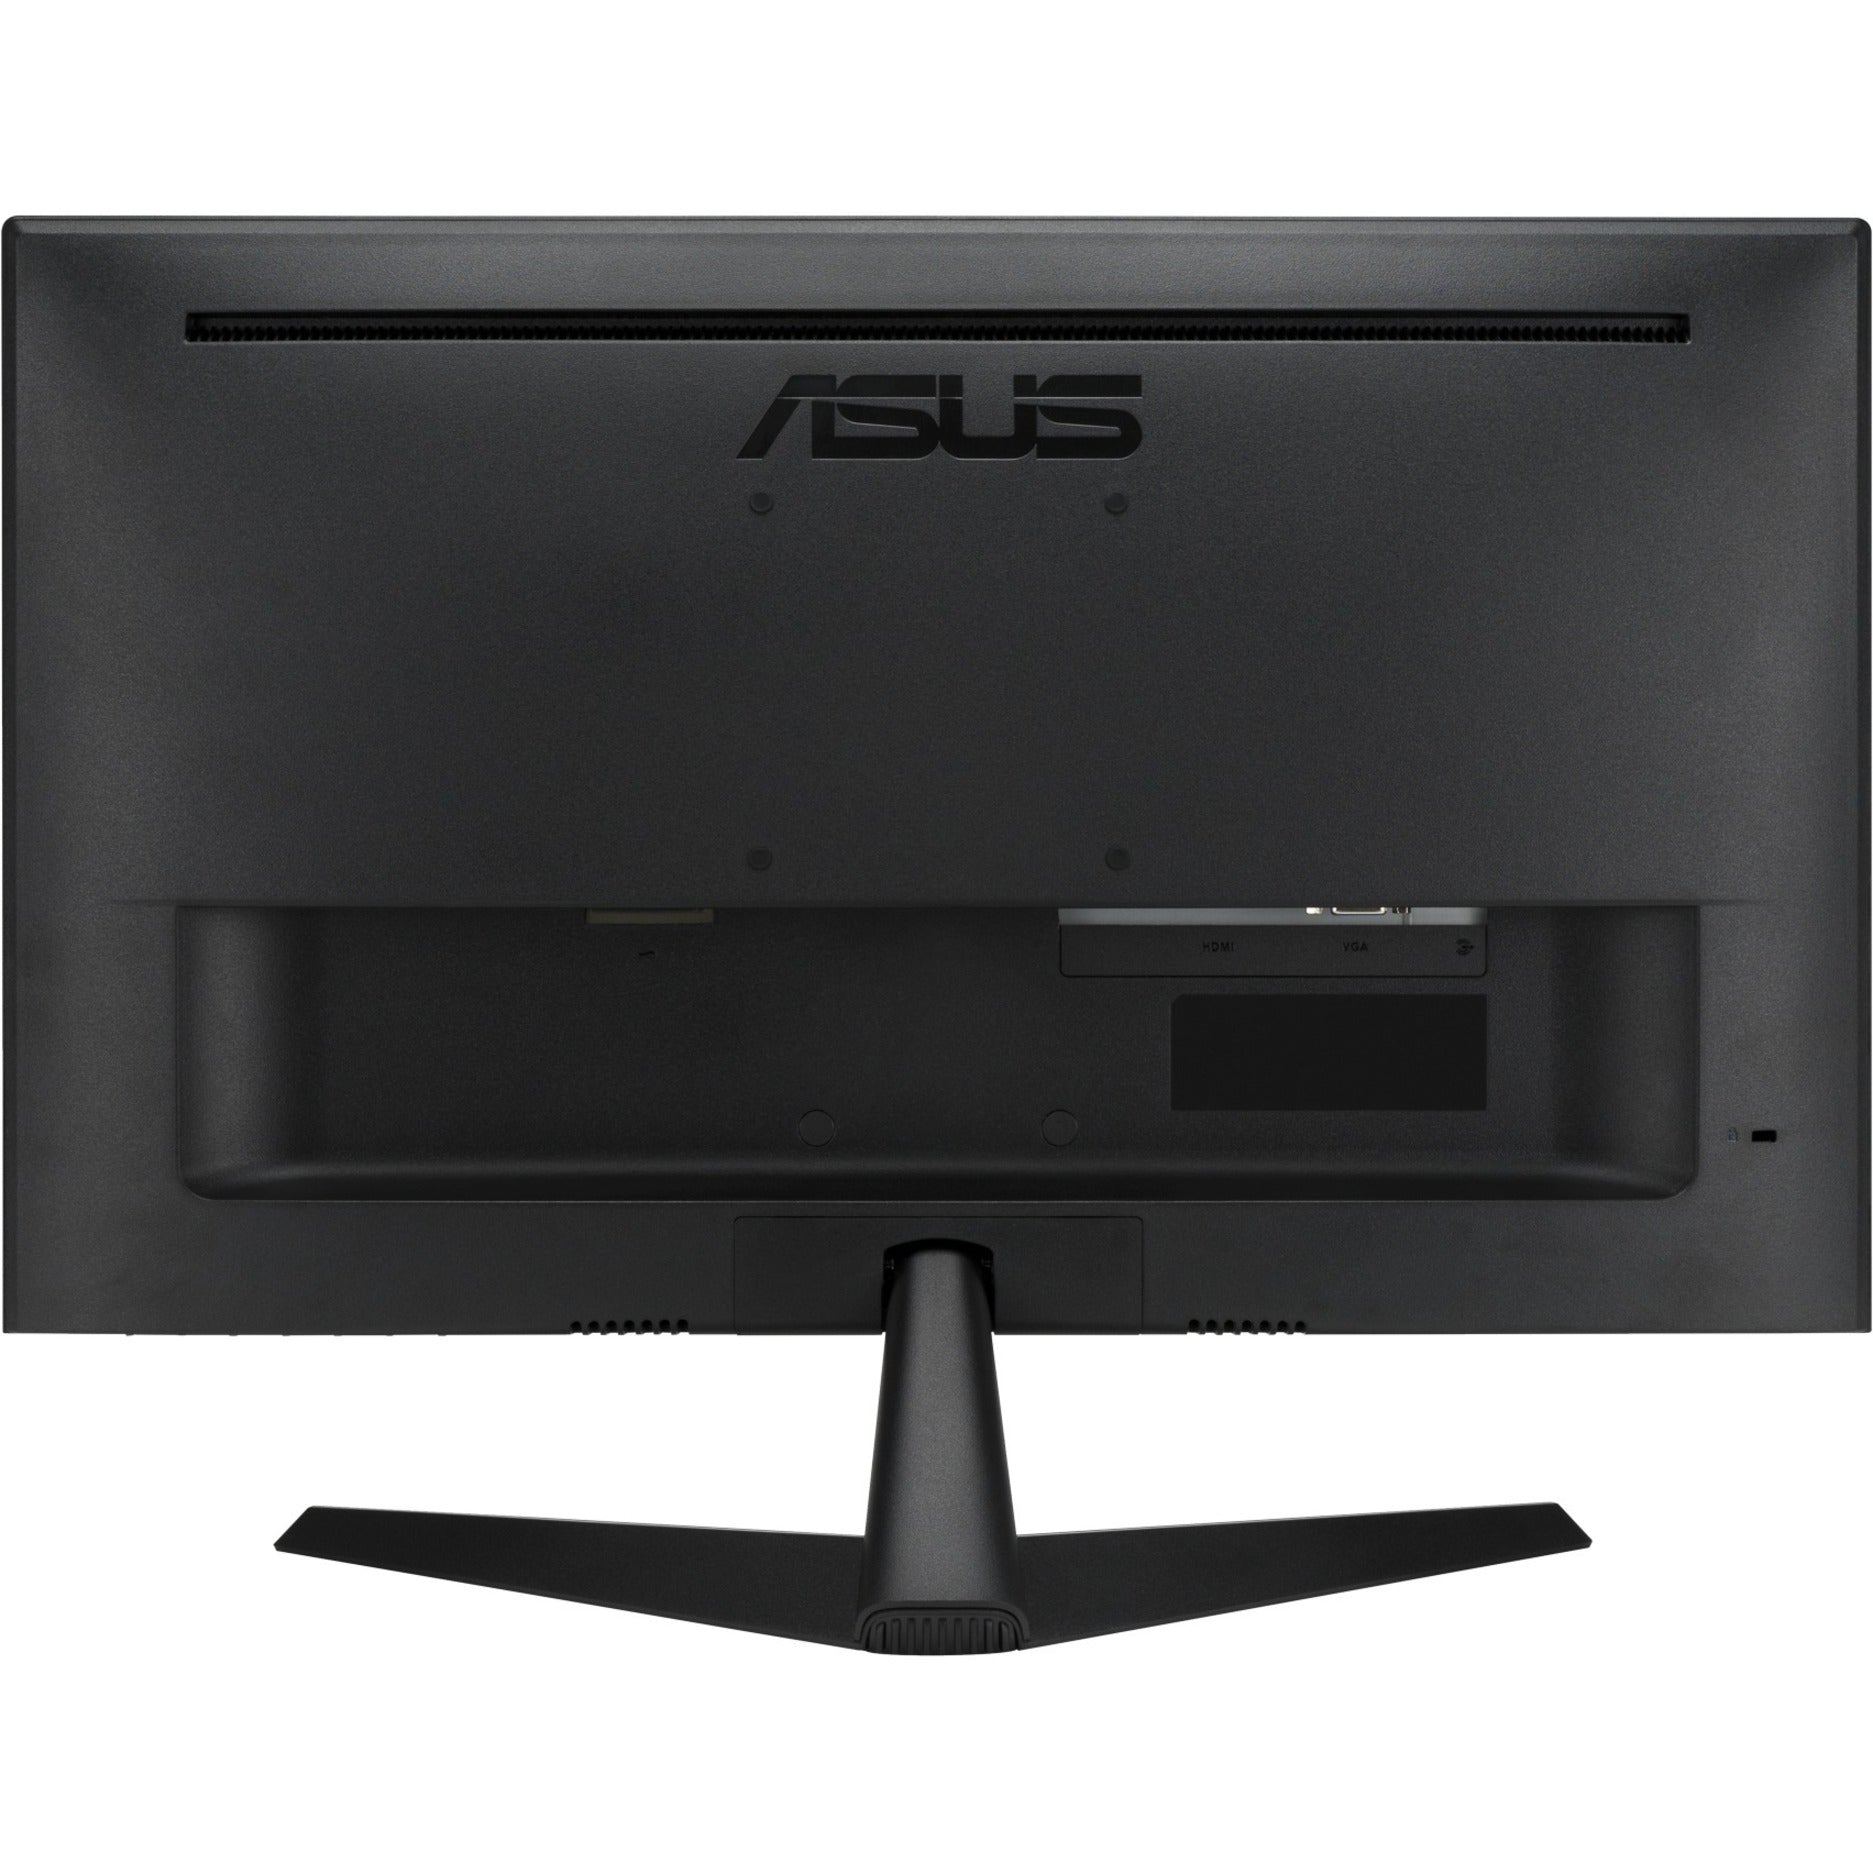 Asus VY249HE 23.8" Full HD LCD Monitor - Black, 16:9, FreeSync, 1ms Response Time